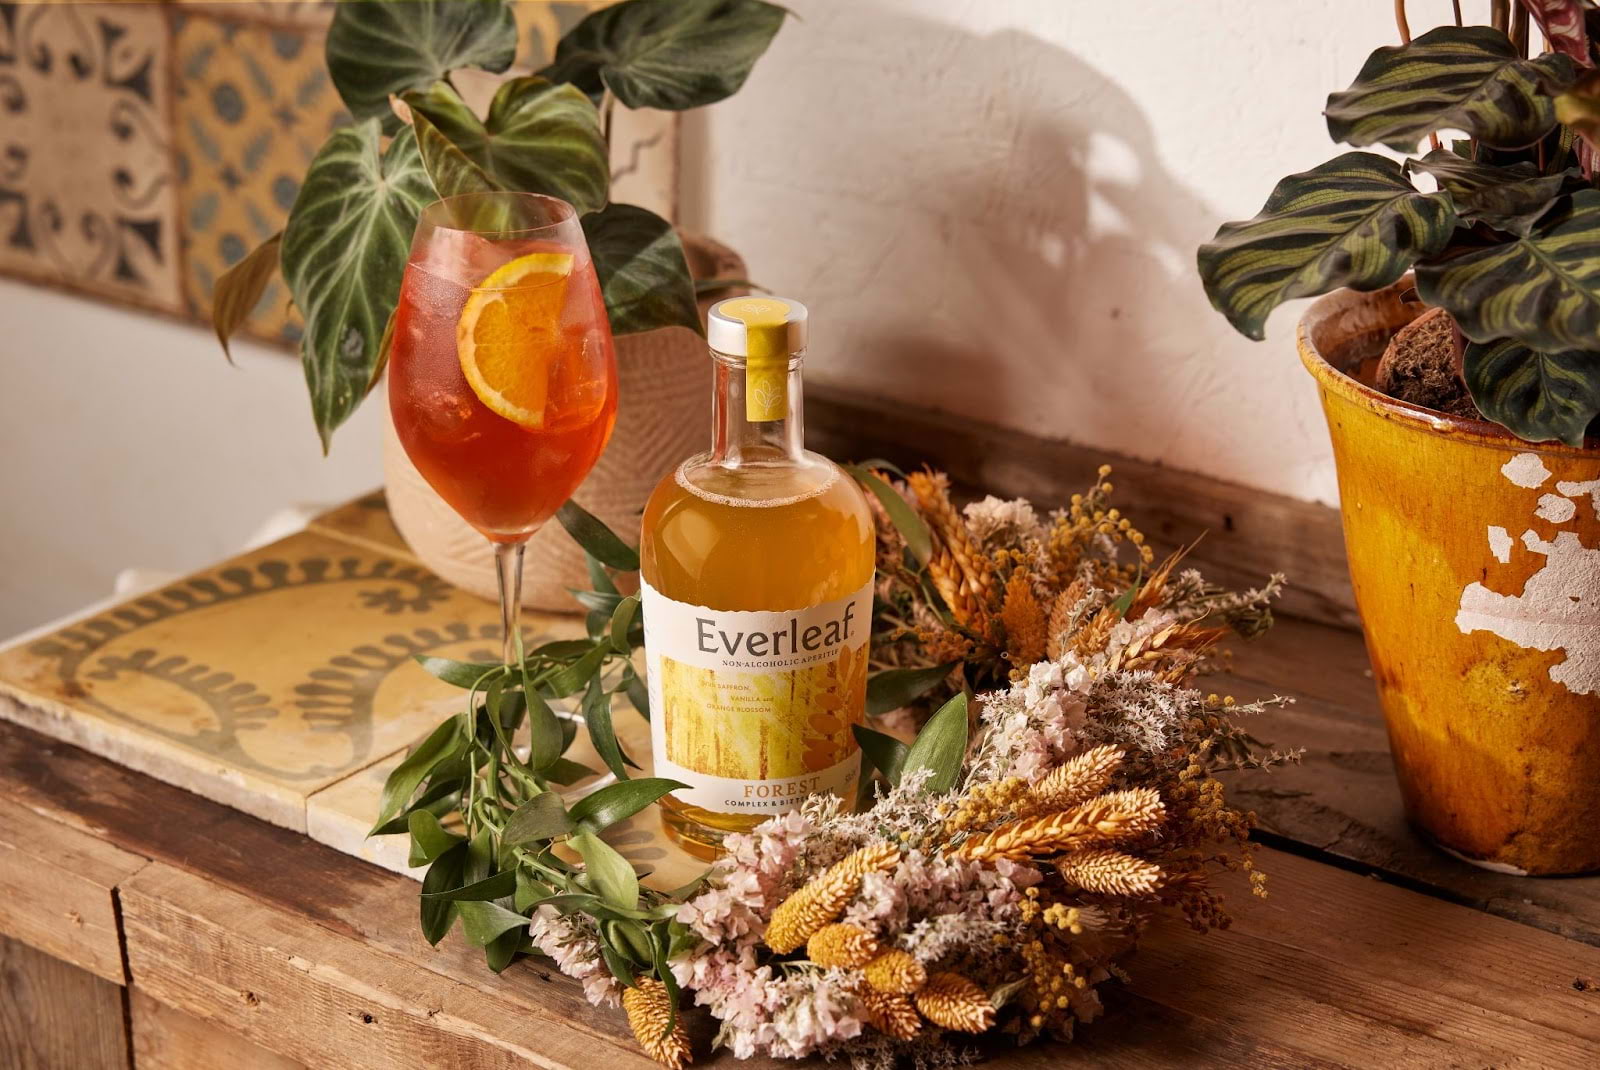 Weave your crown while trying a new Everleaf spritz